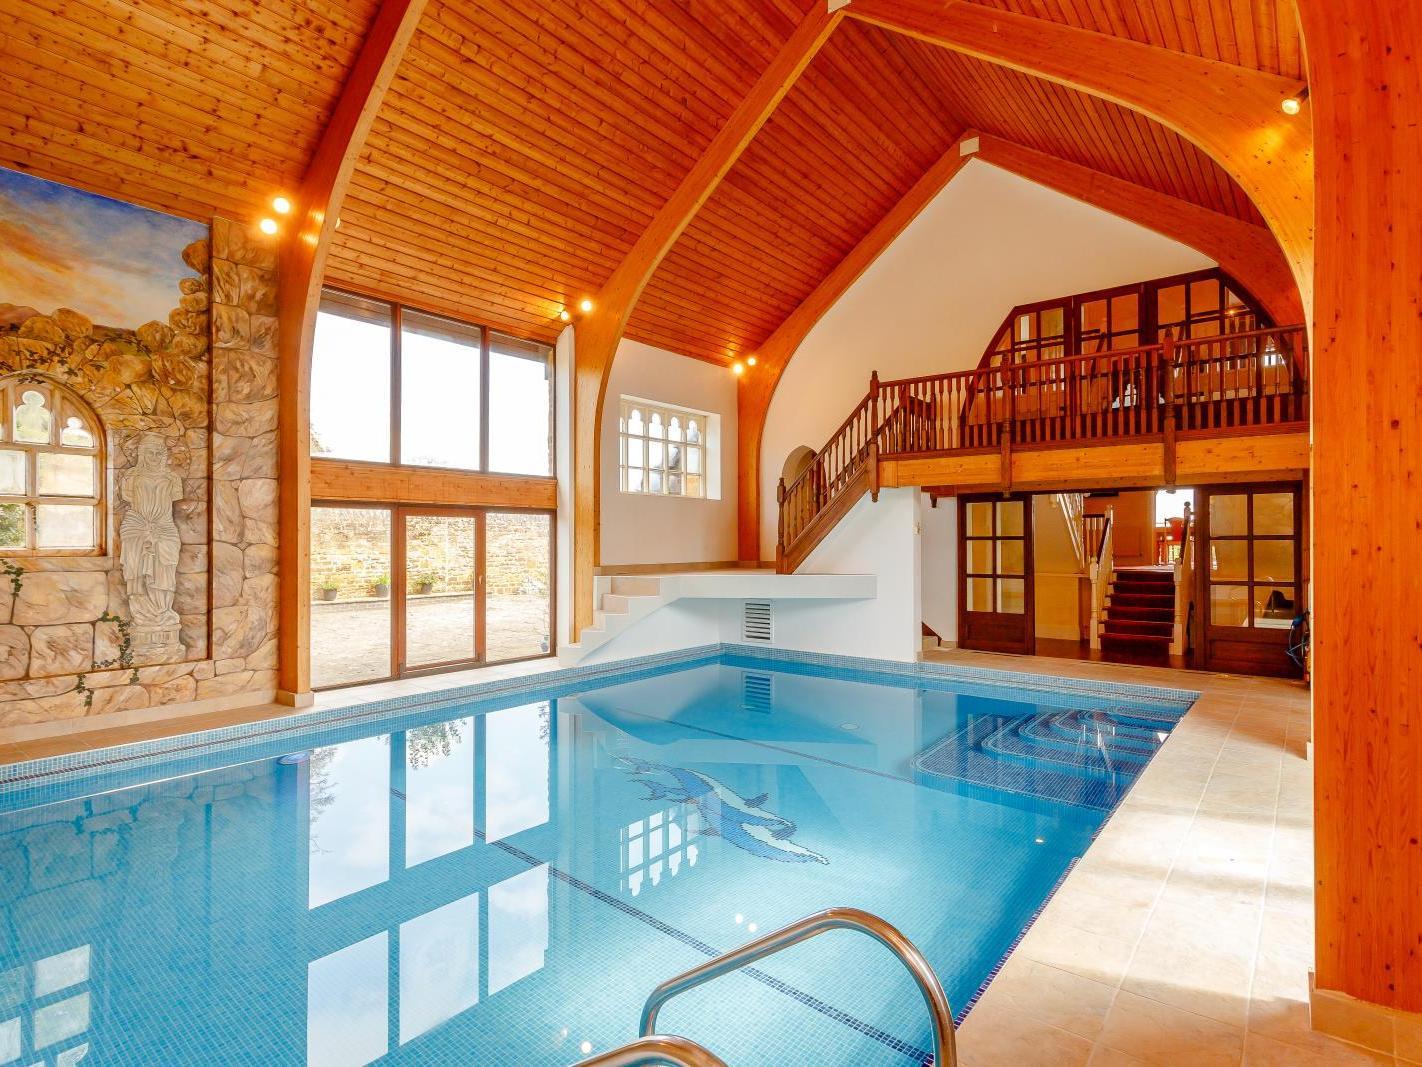 The stunning indoor pool is a highlight of this house. Photo: Fine and Country.